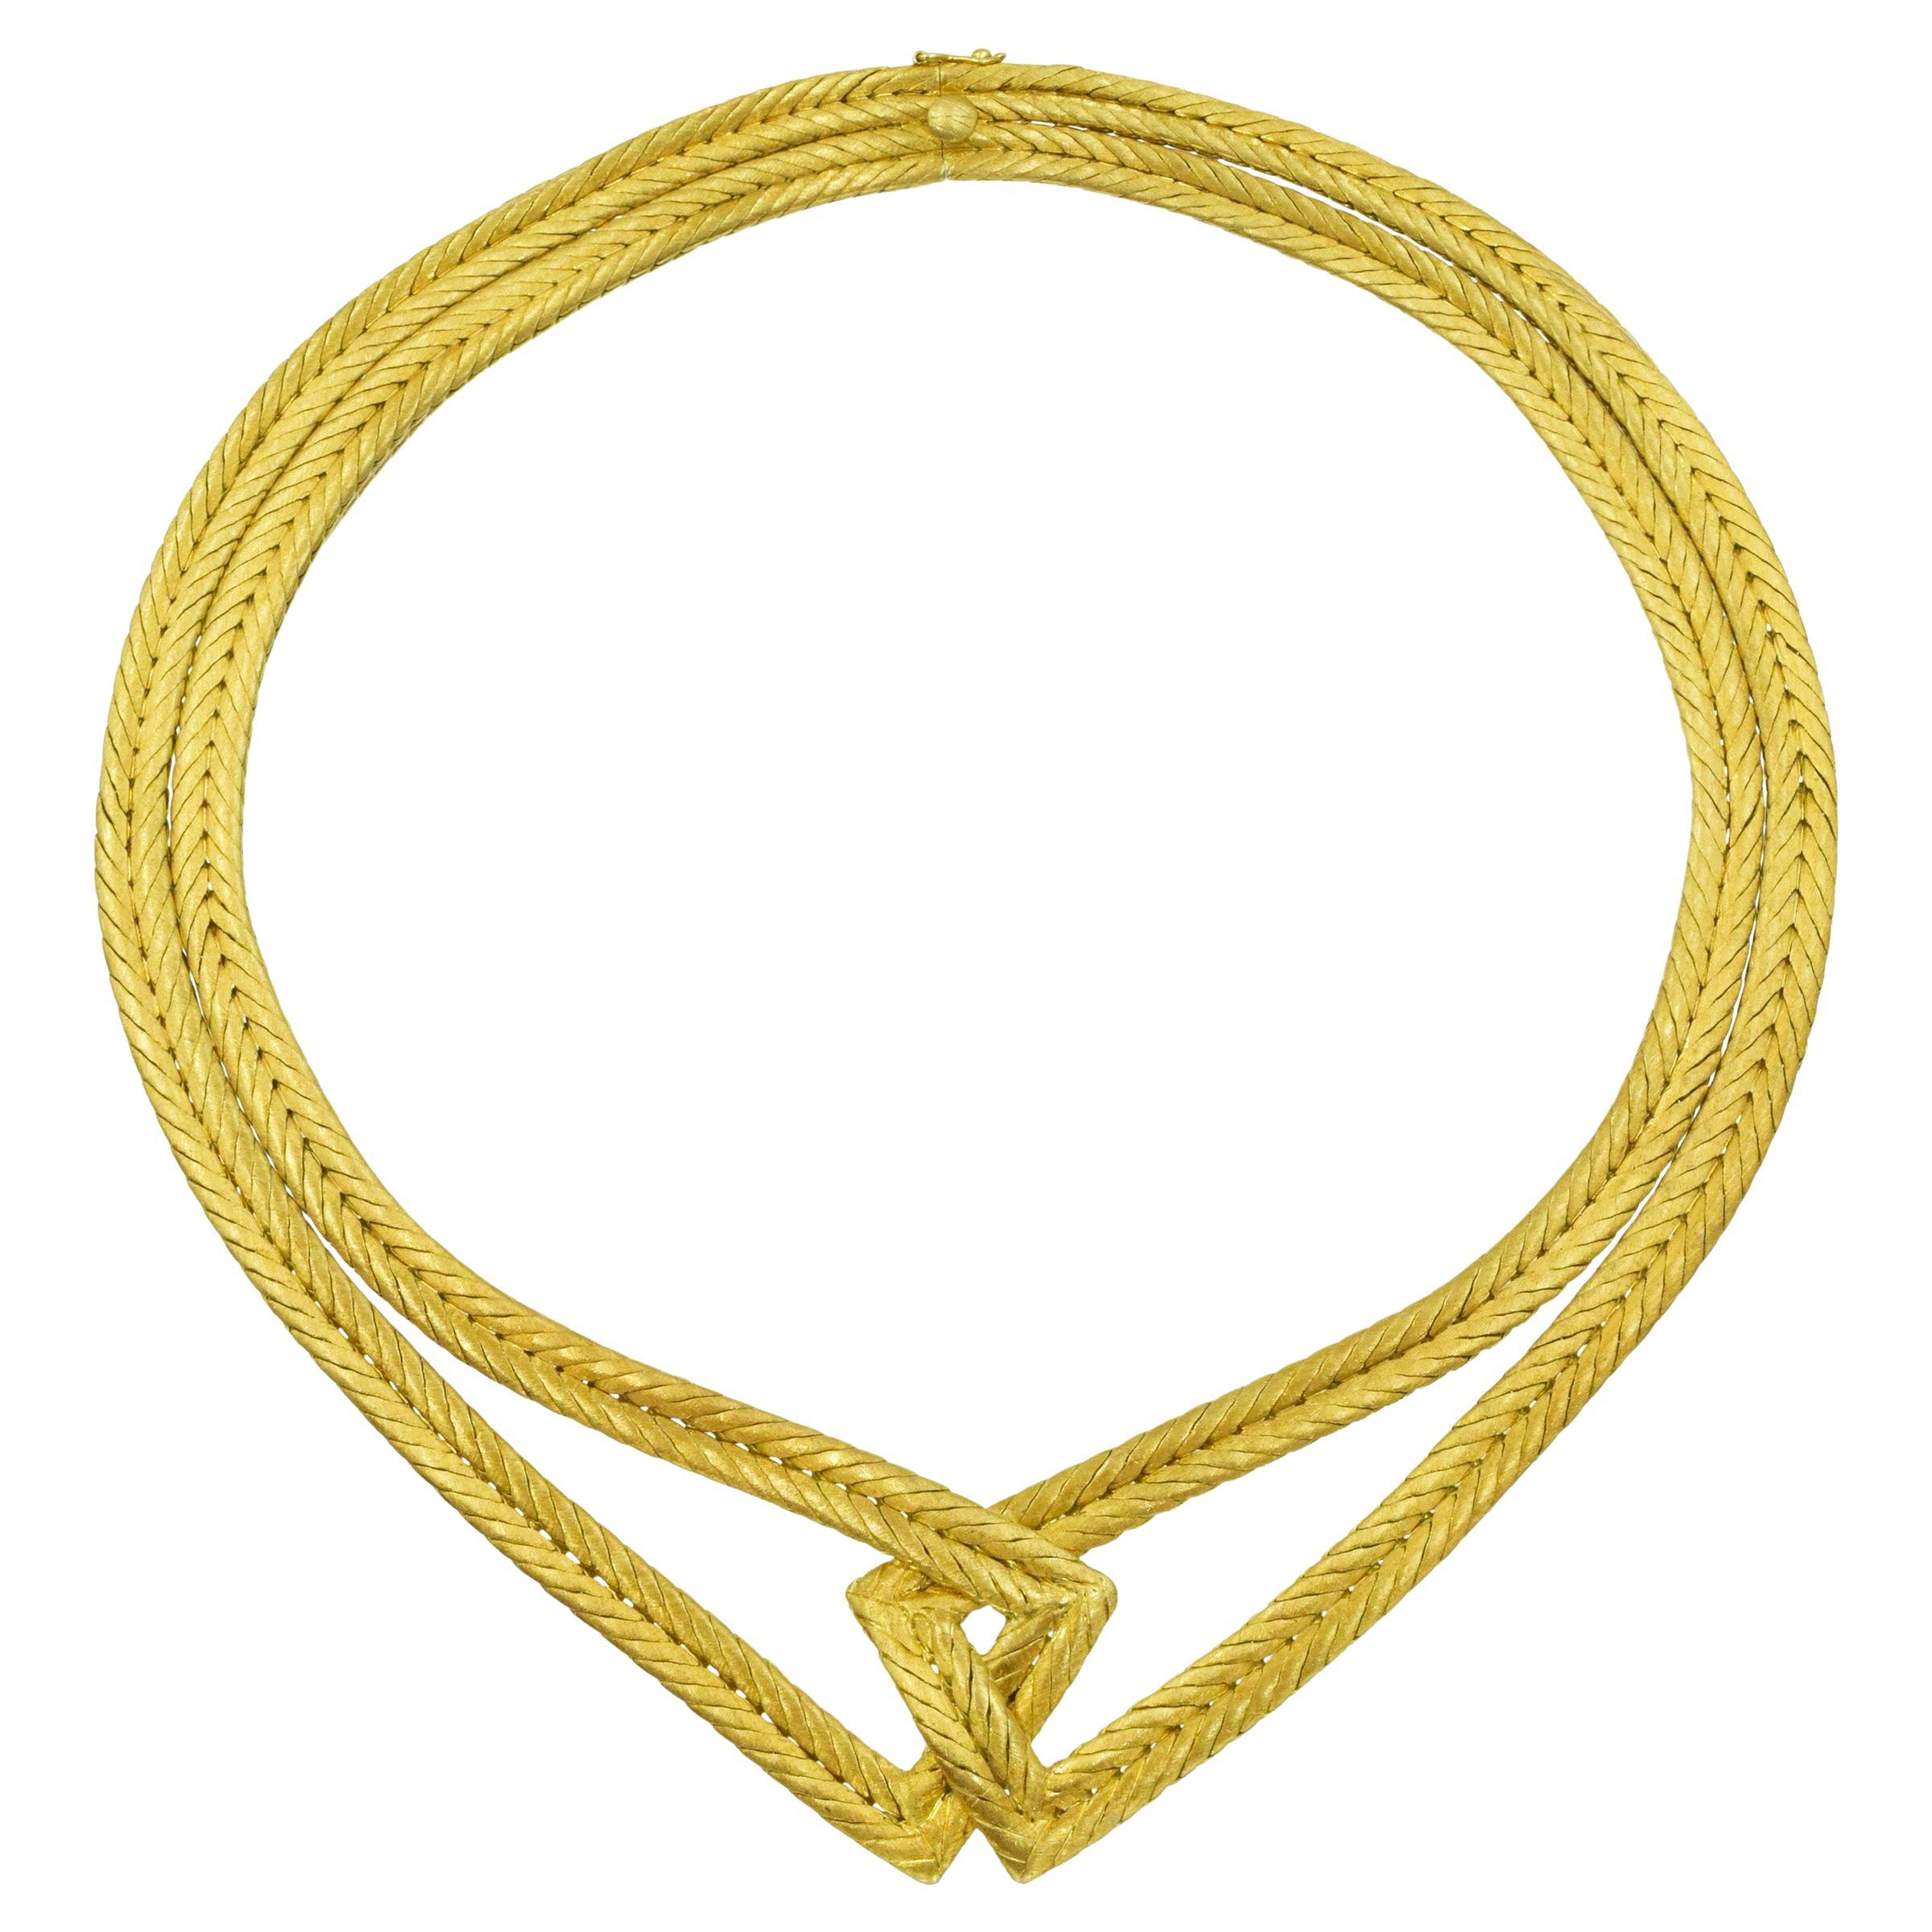 Buccellati Woven Choker Necklace in 18k yellow gold